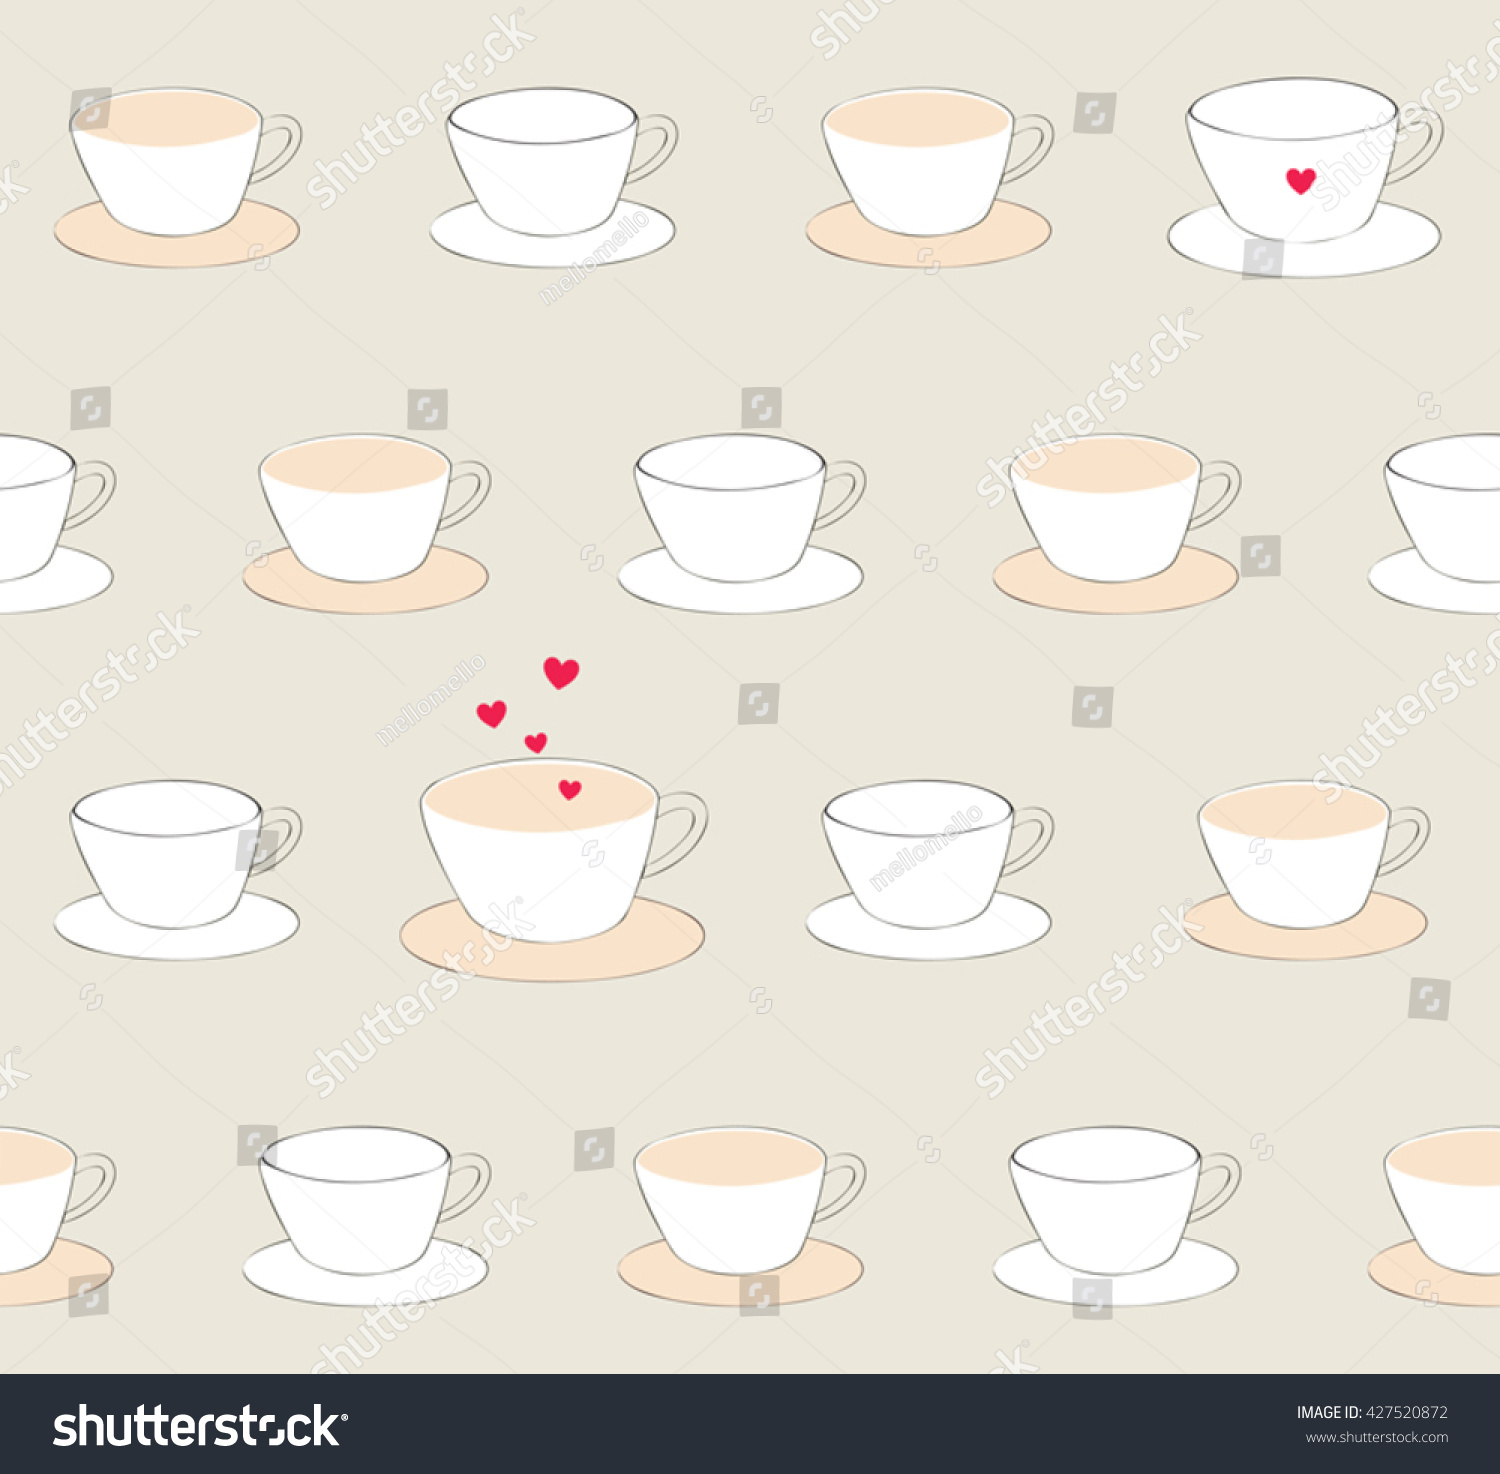 Sweet Cute Pastel Coffee Cup Heart Stock Vector Royalty Free